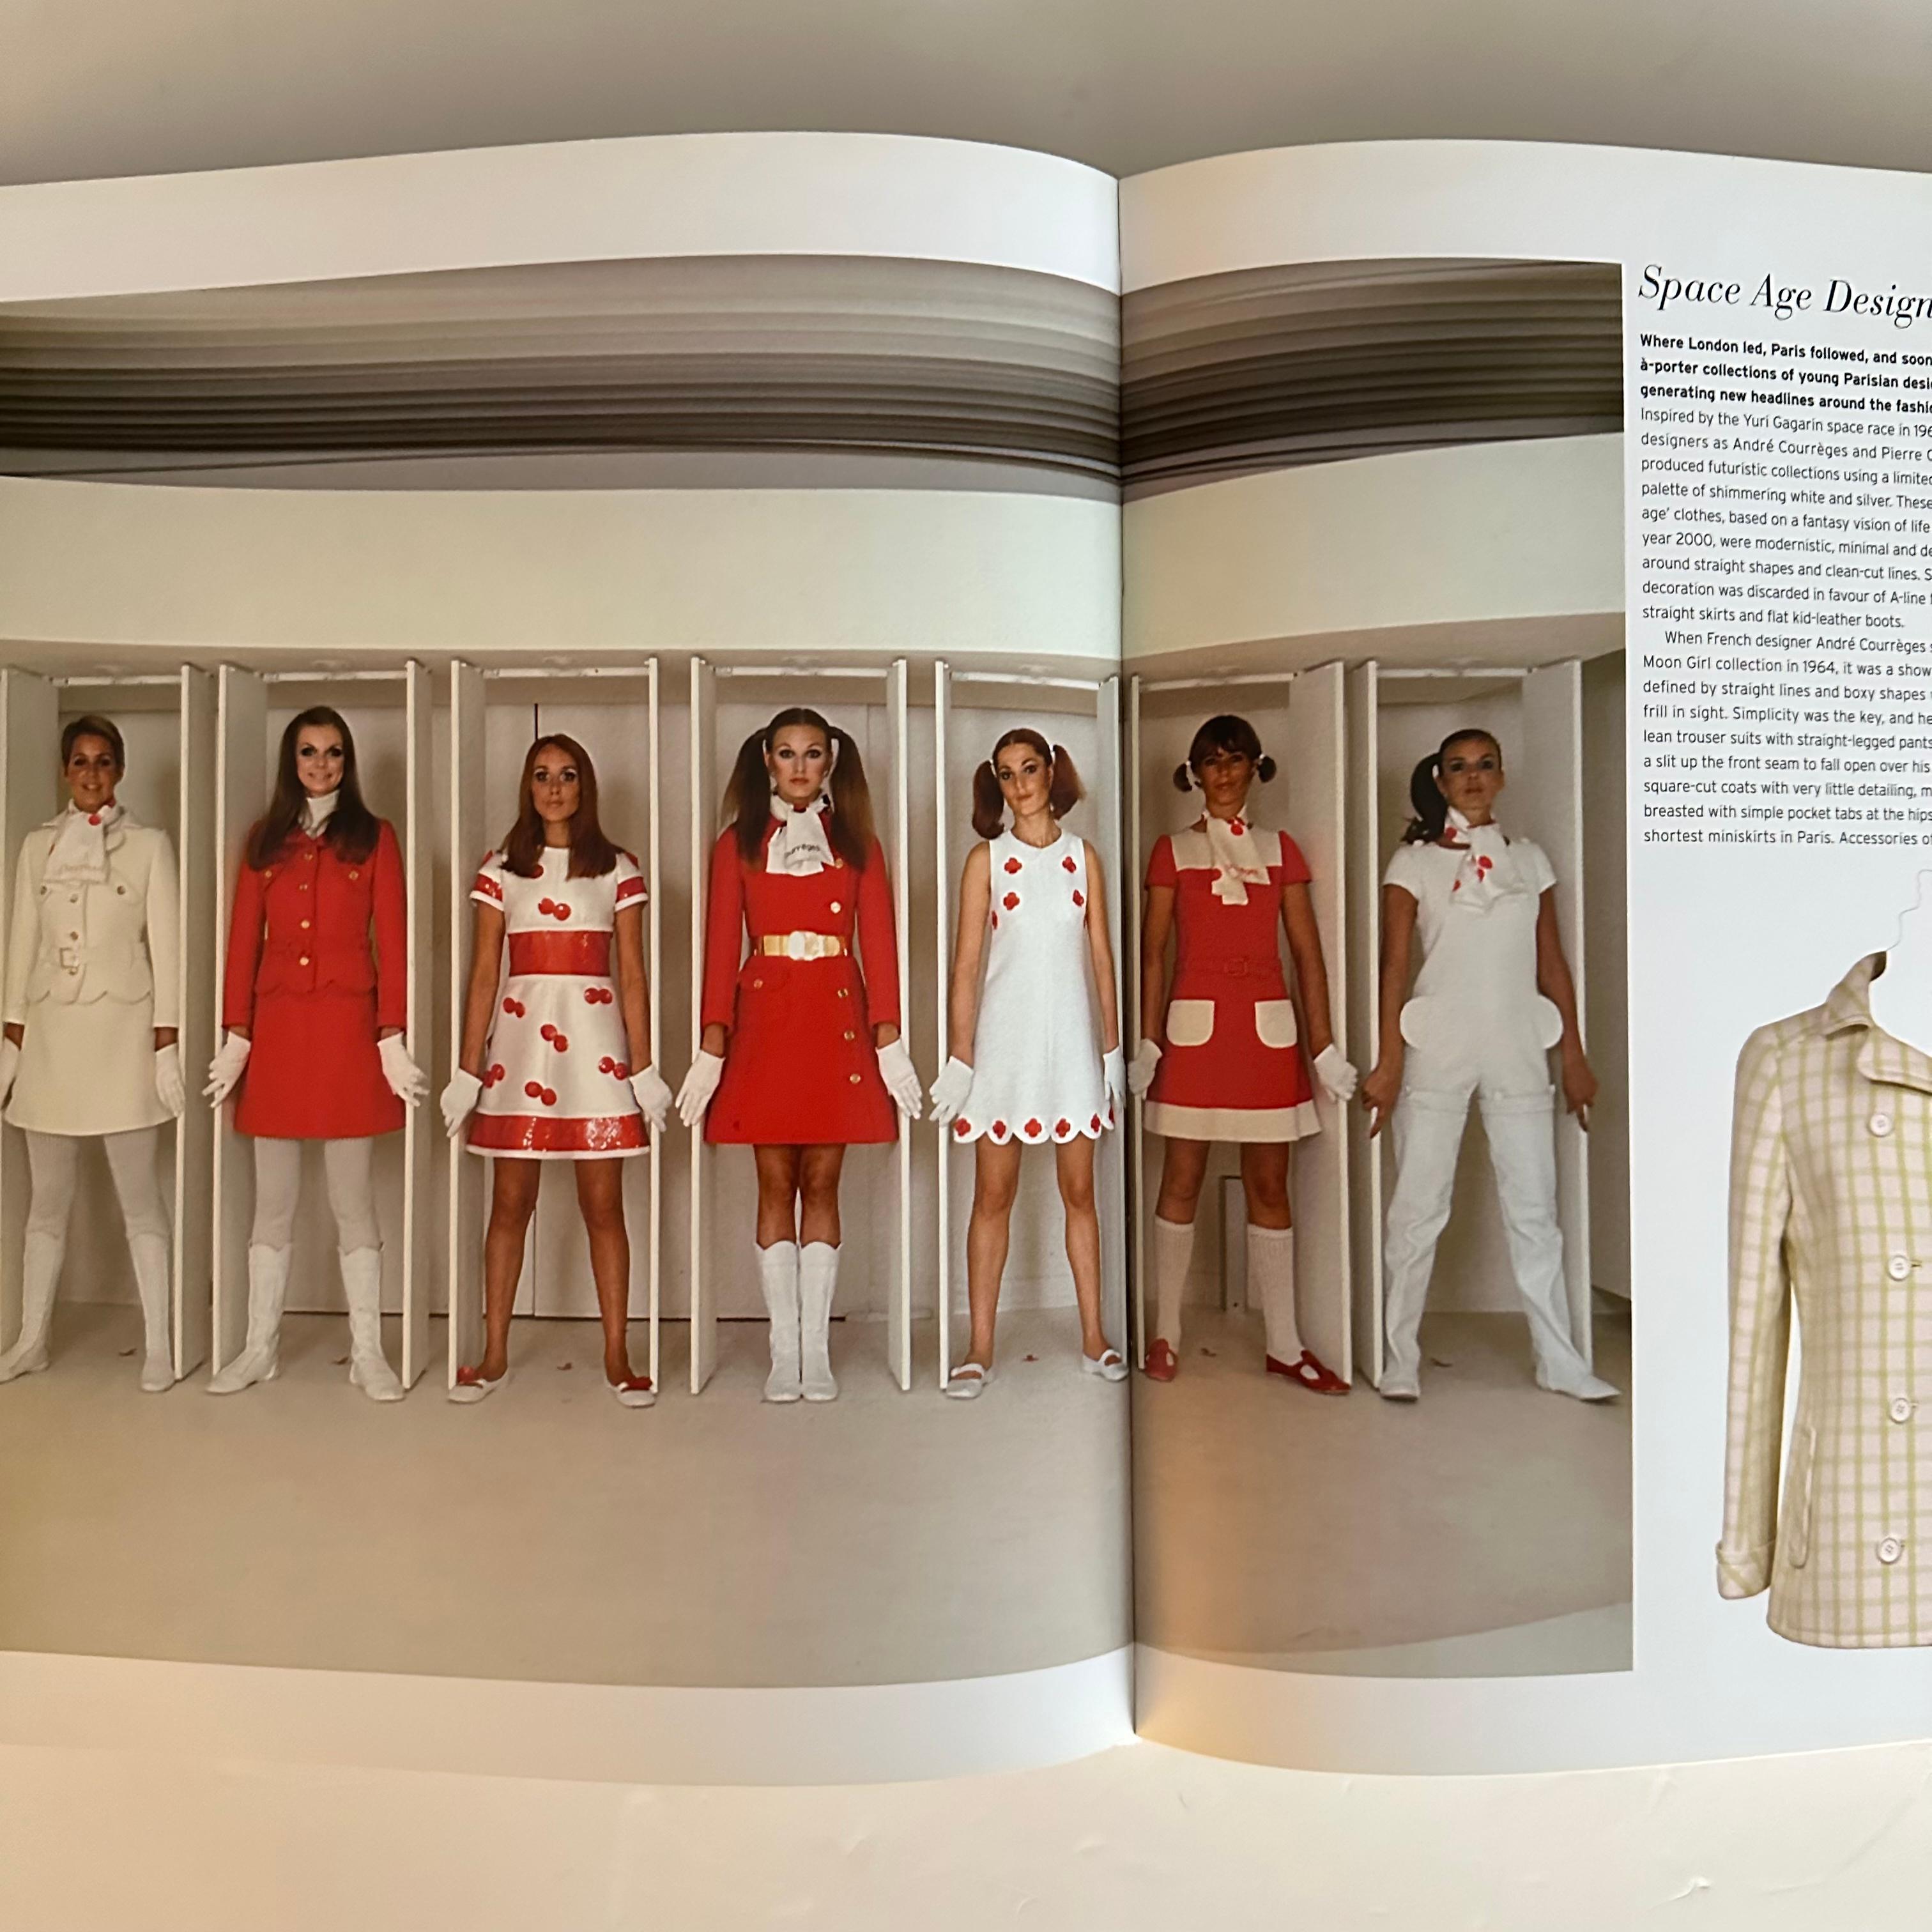 Published by Carlton Books Limited, 1st edition, London, 2006. 

During the course of the 20th century, fashion has been lifted from the status of what we just wear to being an art form. The vintage clothing in this book has been culled from various